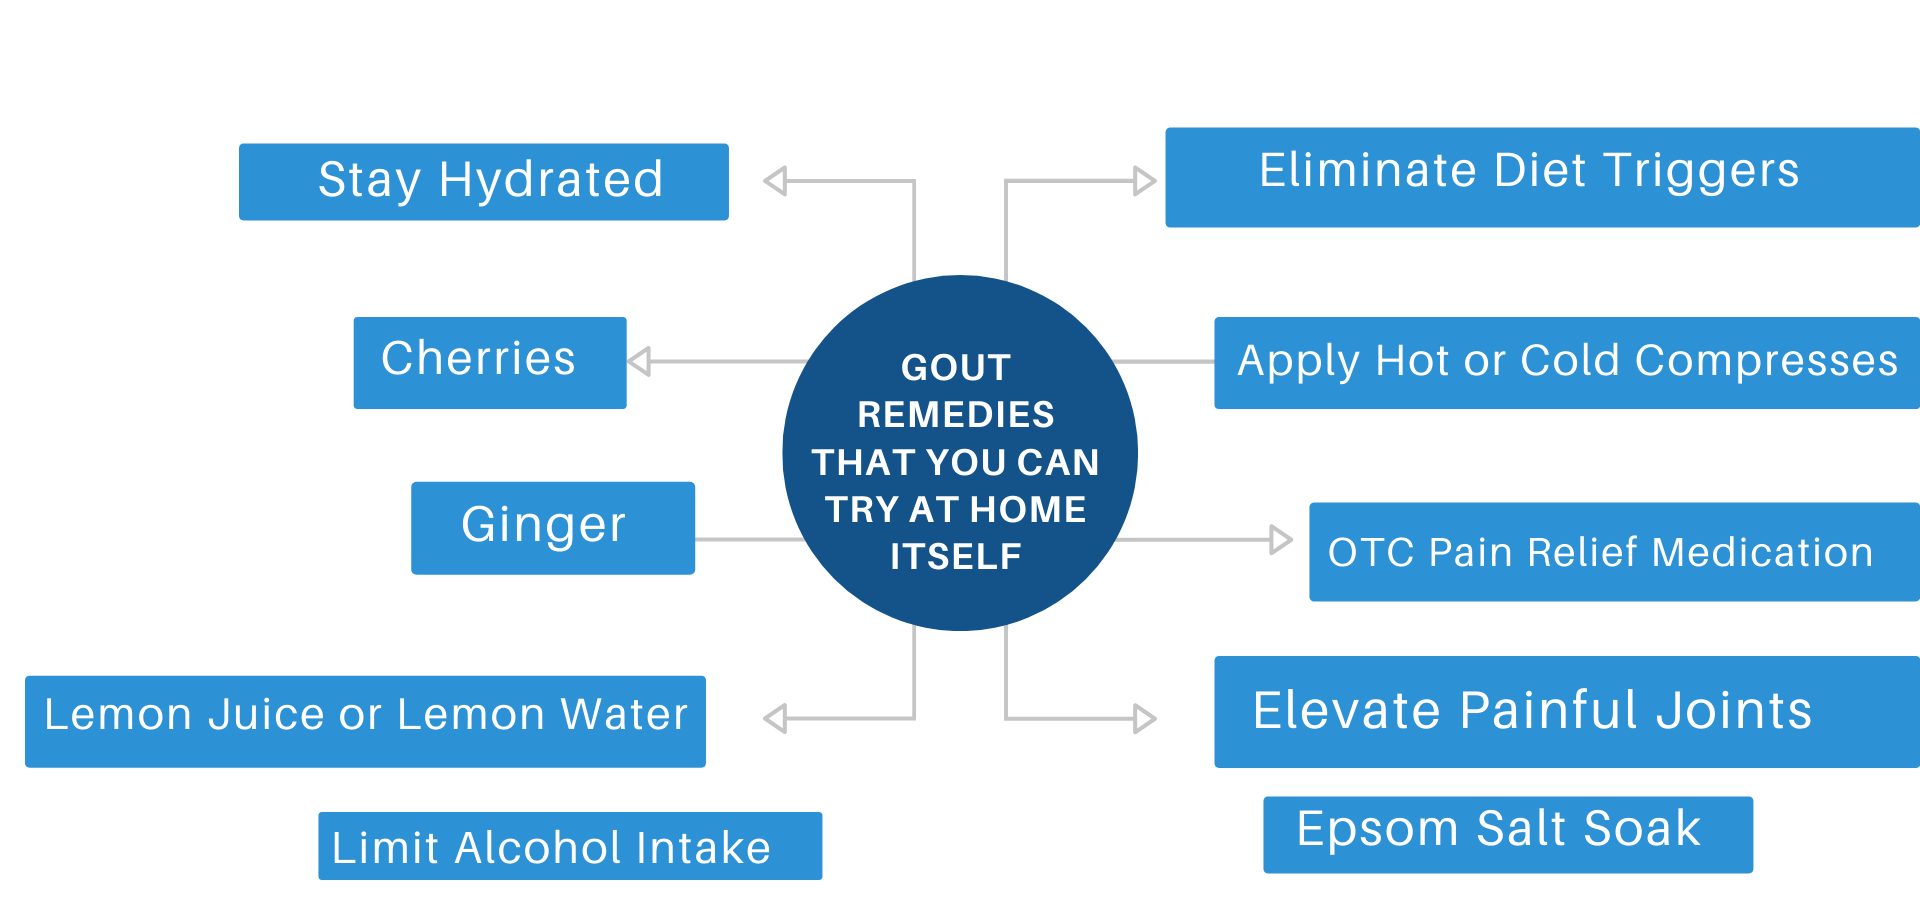 Gout Home Remedies